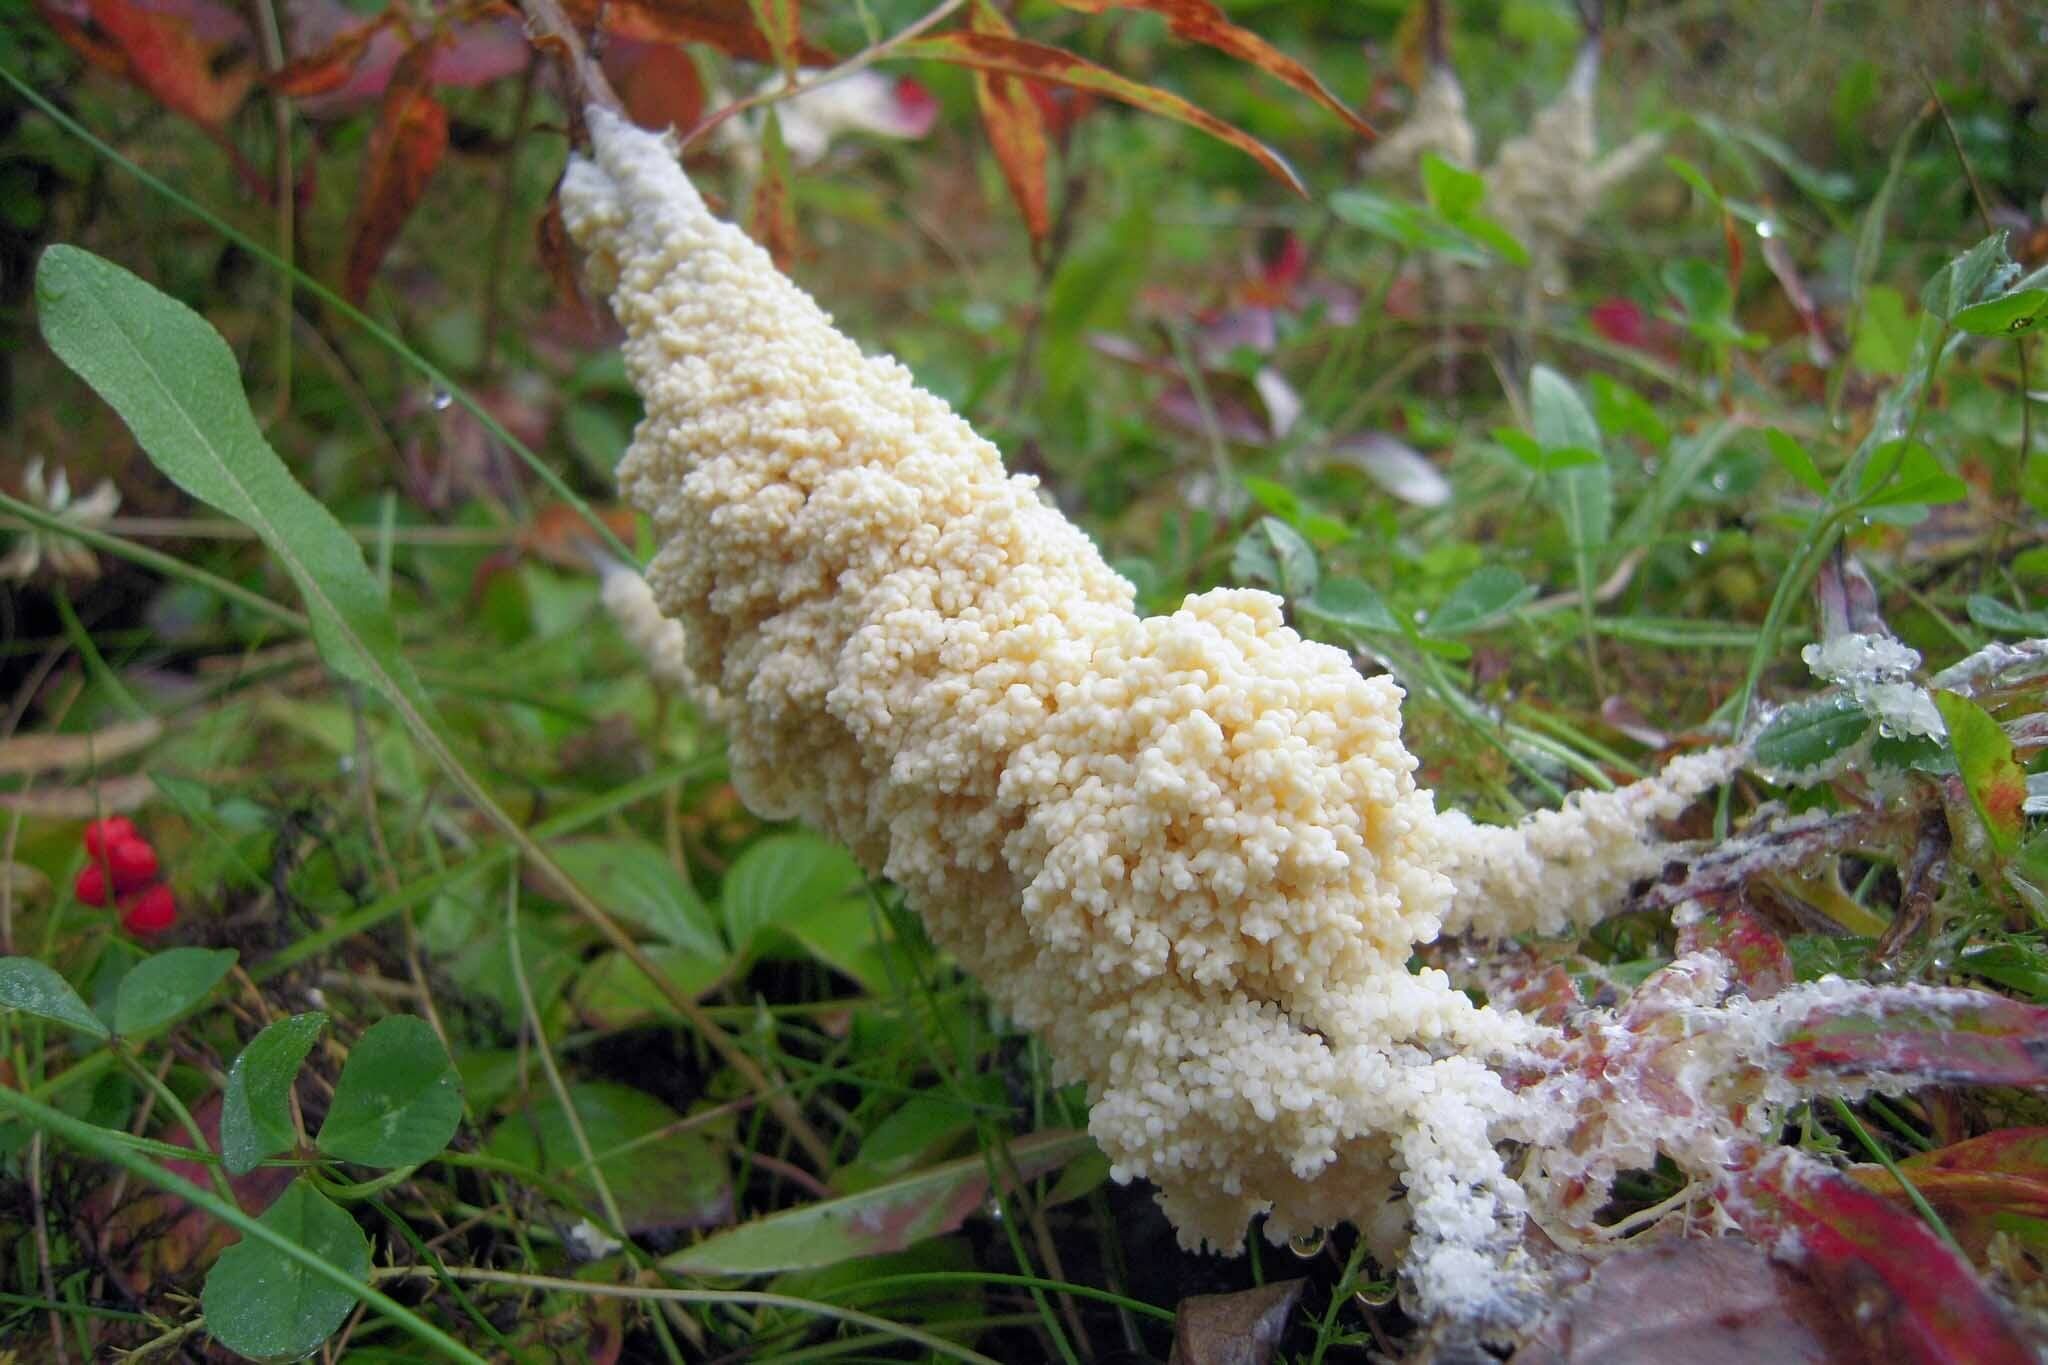 Dog sick fungus, named for its resemblance to canine vomit, is neither vomit nor a fungus. It is a kind of slime mold common in tundra. (Photo by Matt Bowser/USFWS)